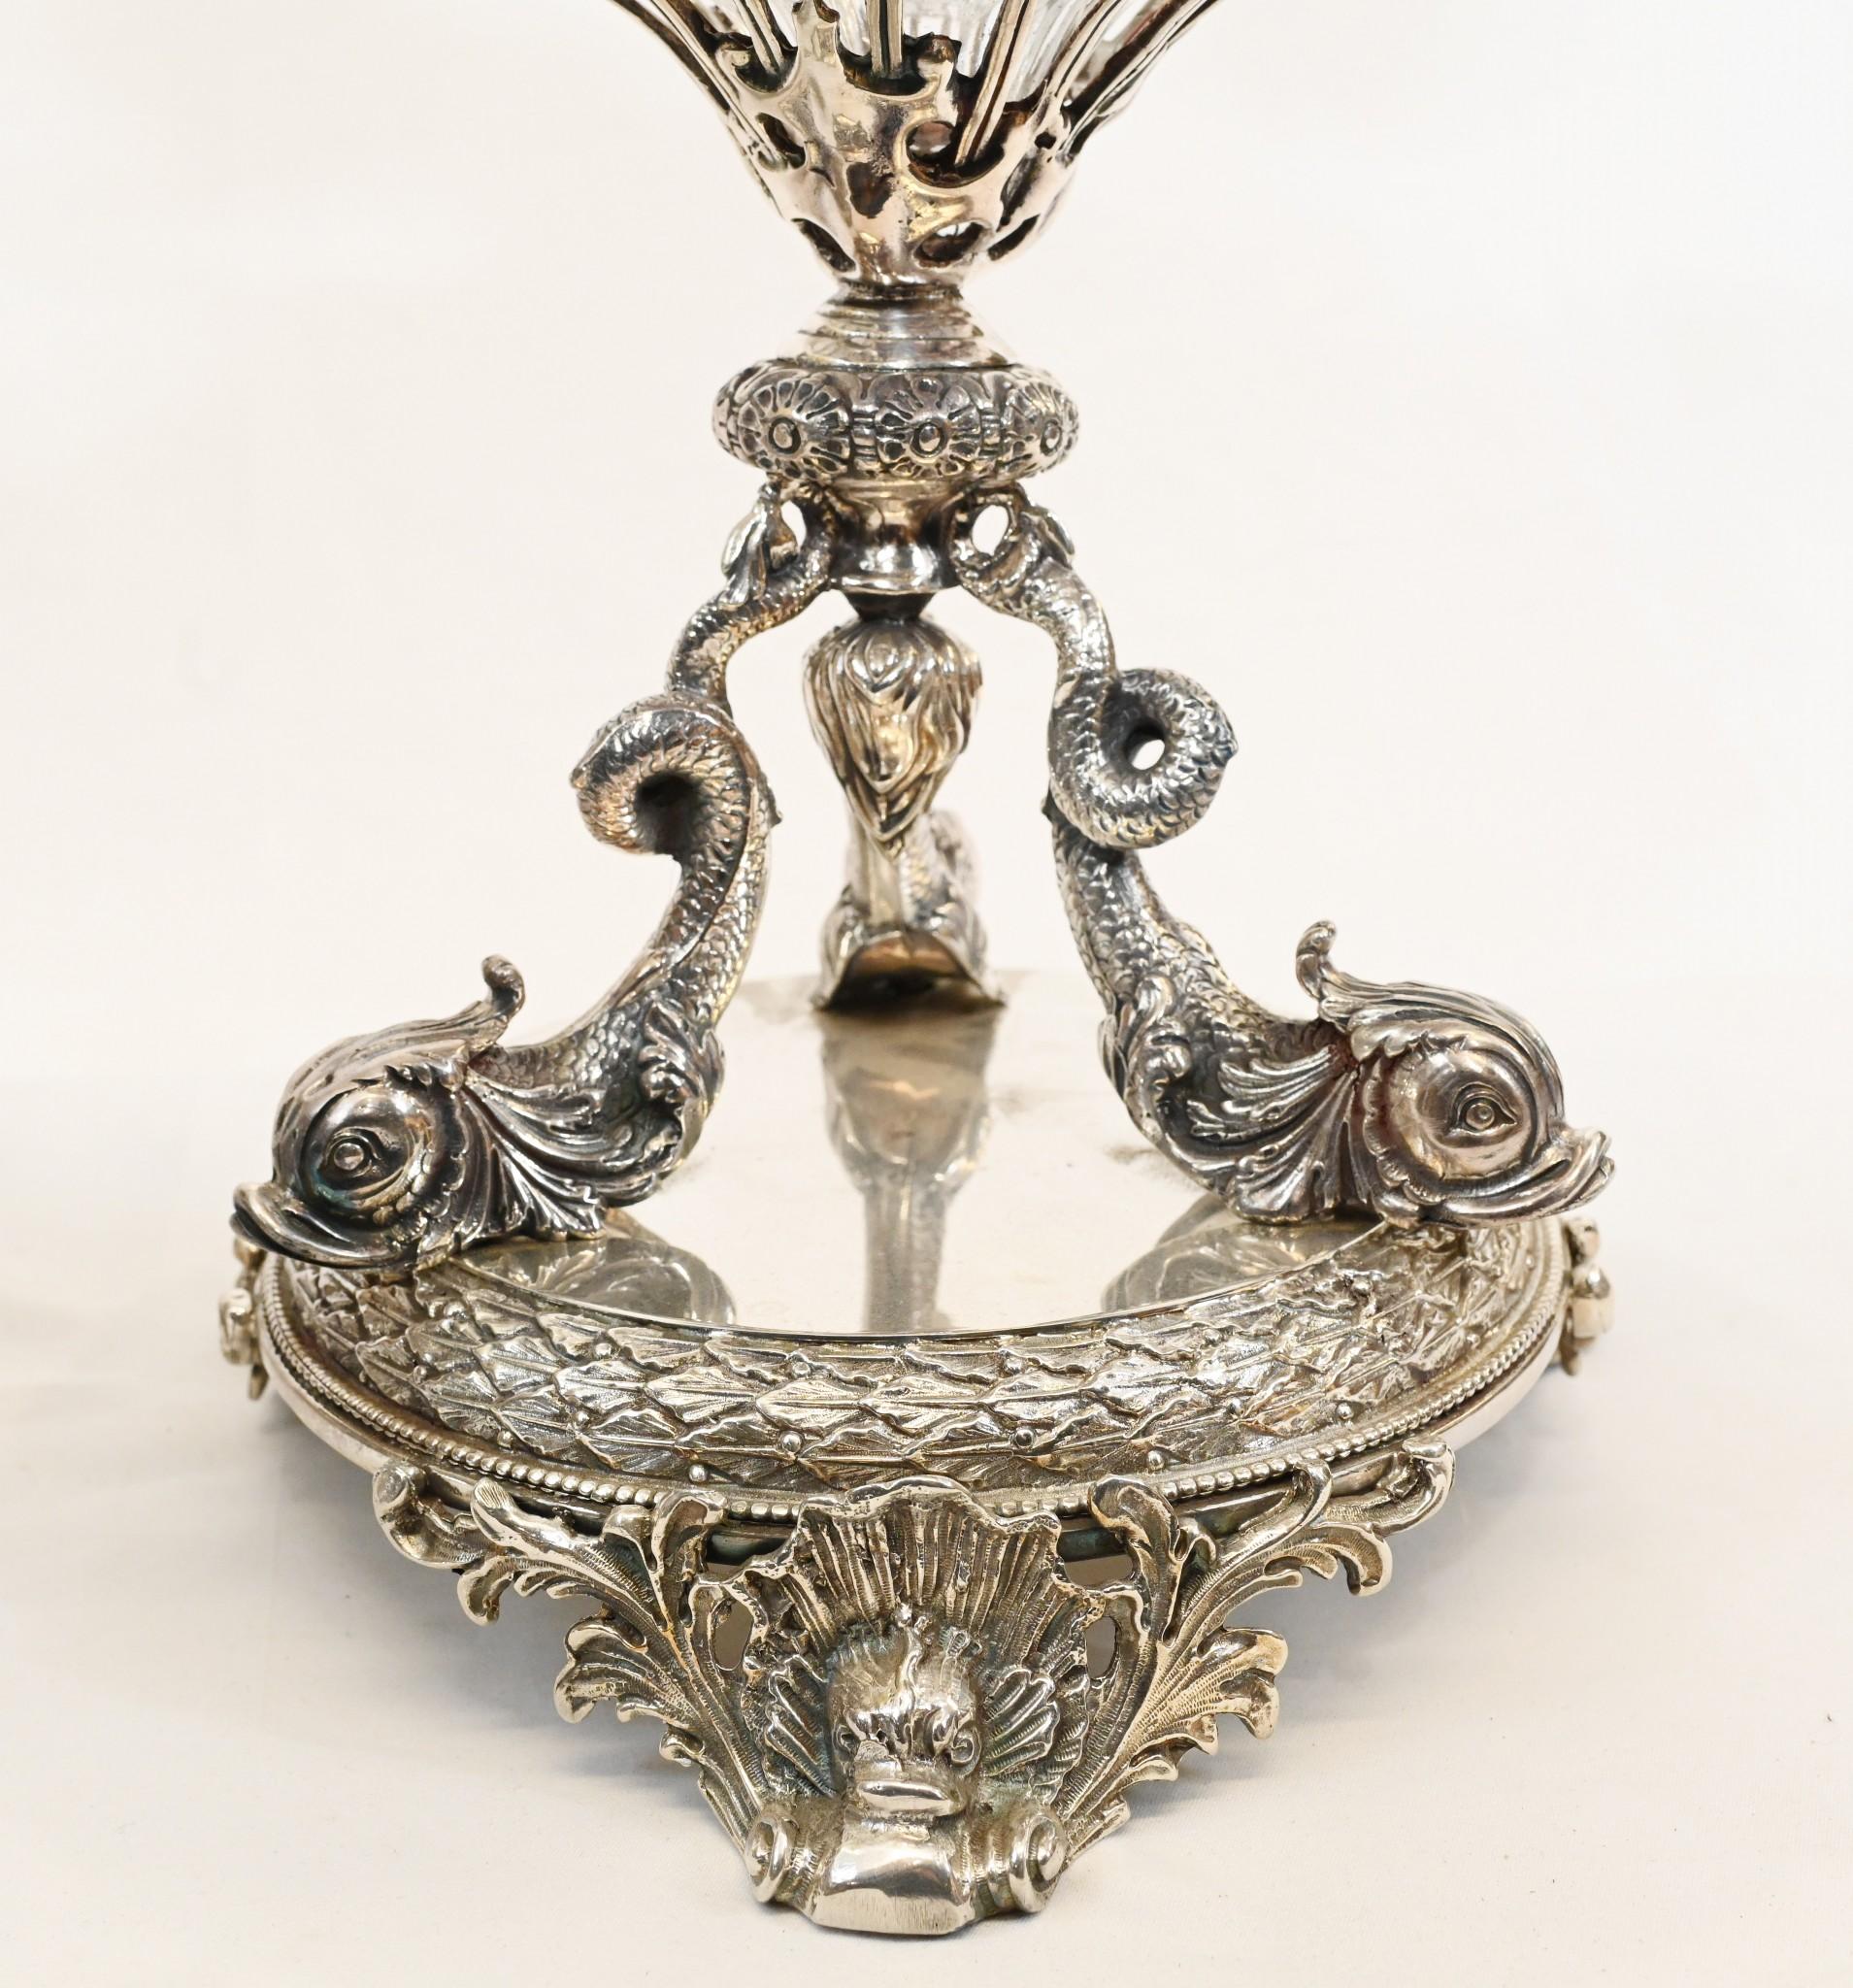 Stunning pair of Victorian style Elkington silver plate dishes
Each serpent stand holds aloft the cut glass bowl
Lovely finish to the silver plate, so bright and shiny
Serpents are especially detailed with hand chased designs
Also worthy of note